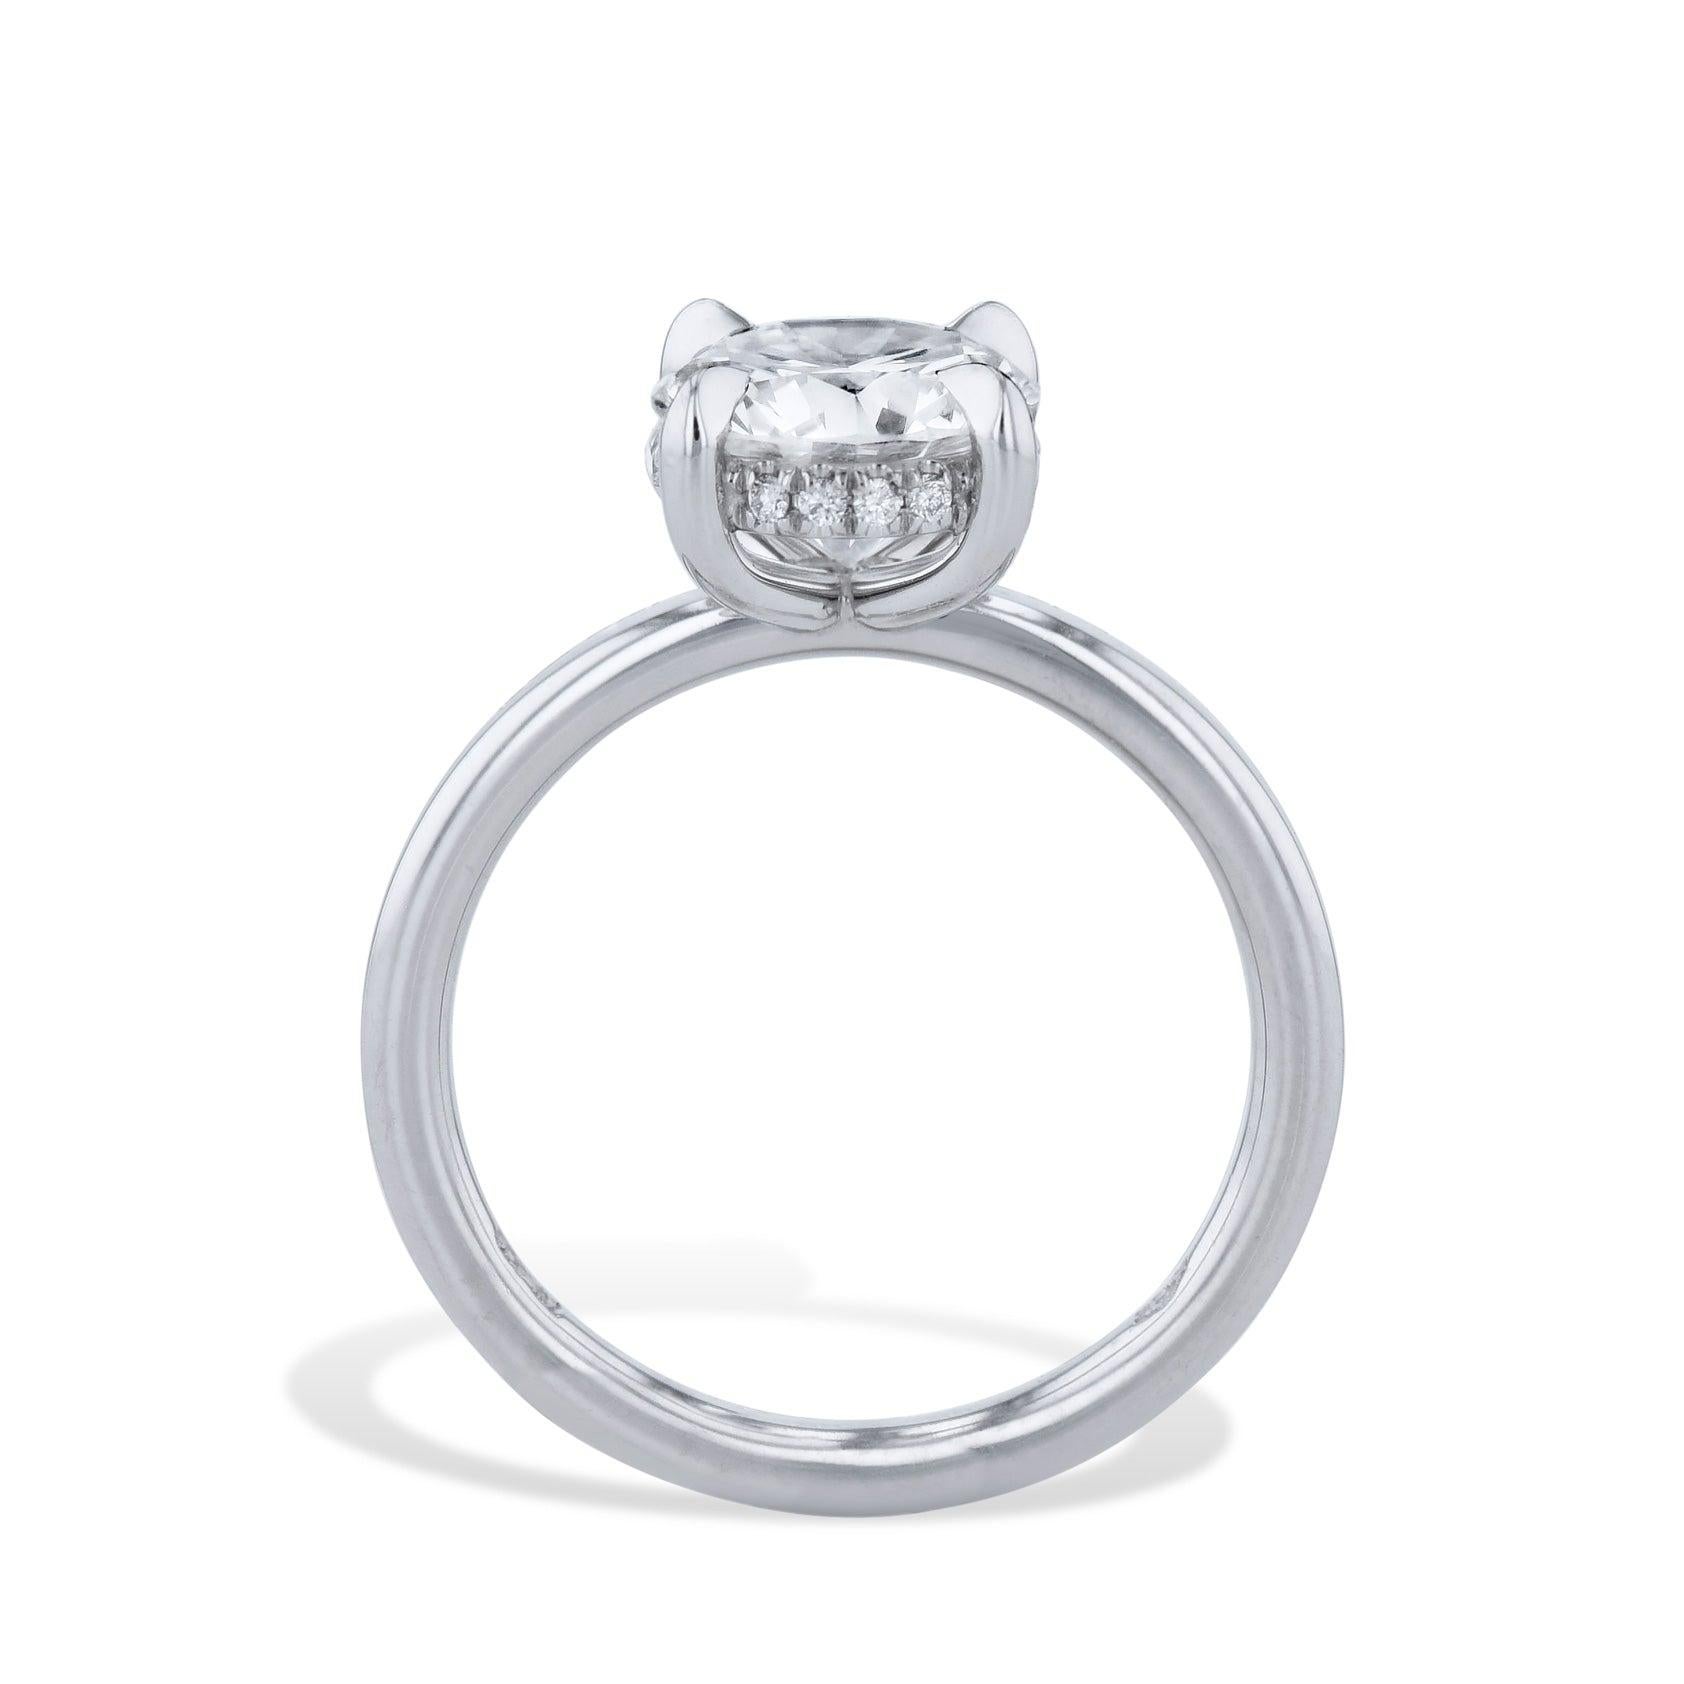 This Platinum Round Diamond Engagement Ring features a stunning Round Brilliant Cut Diamond set in the center, embraced with 16 shimmering 0.07ct F/G VS Pave set stones under the basket. Crafted from high-quality platinum and handmade to perfection,